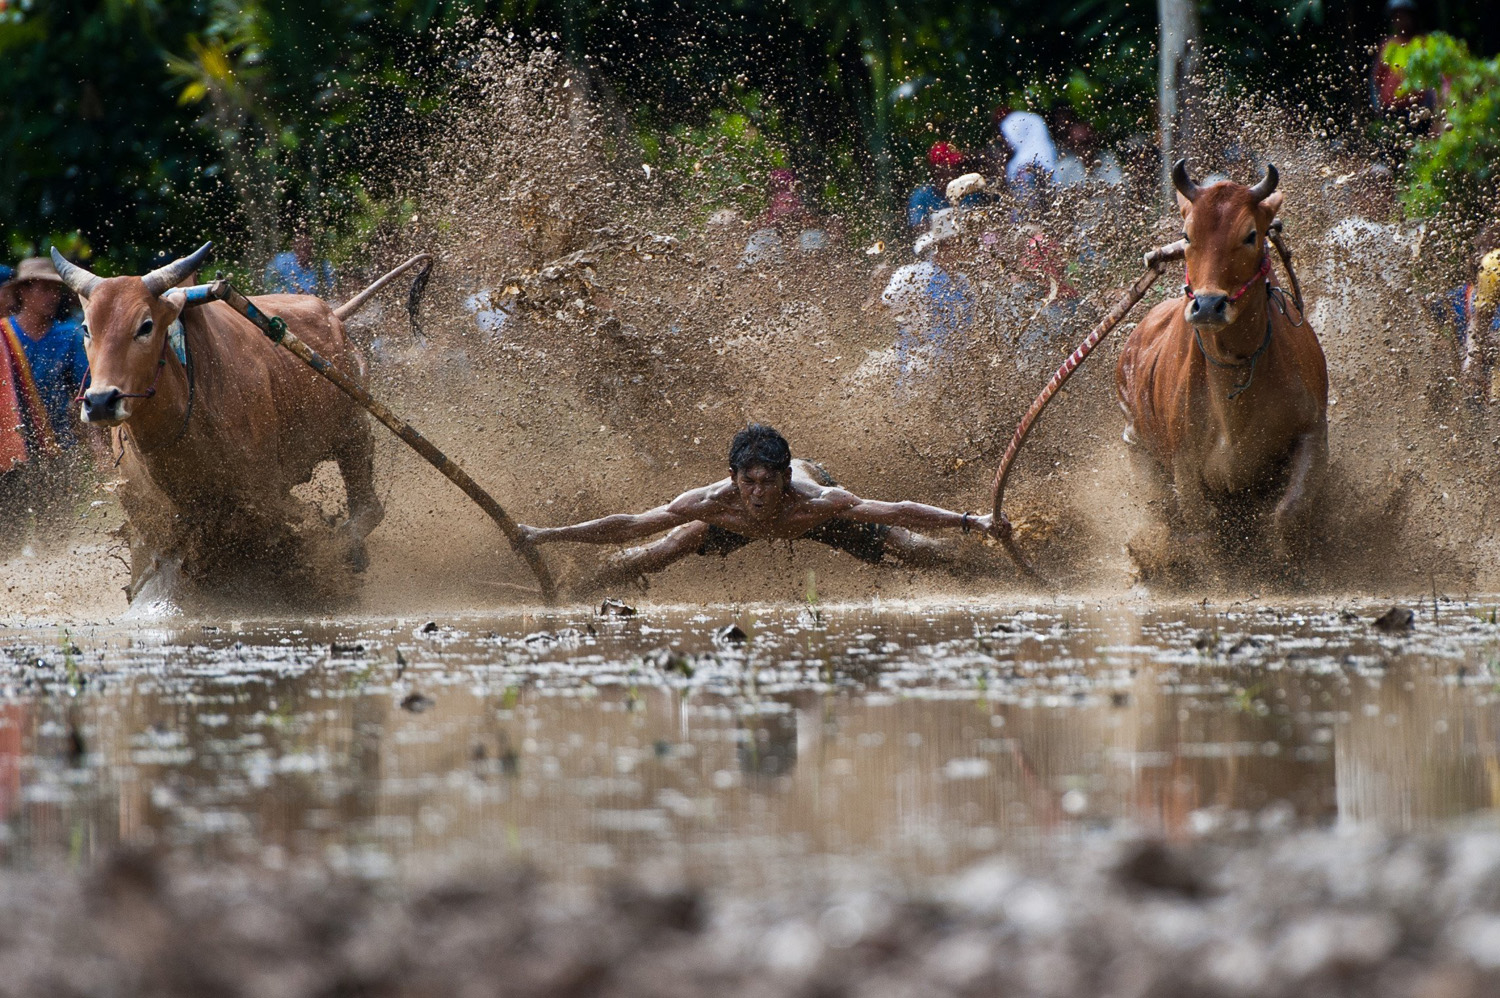 A man partakes in a traditional game, Pacu Jawi, in a field in Rambatan, Indonesia on June 14, 2014.